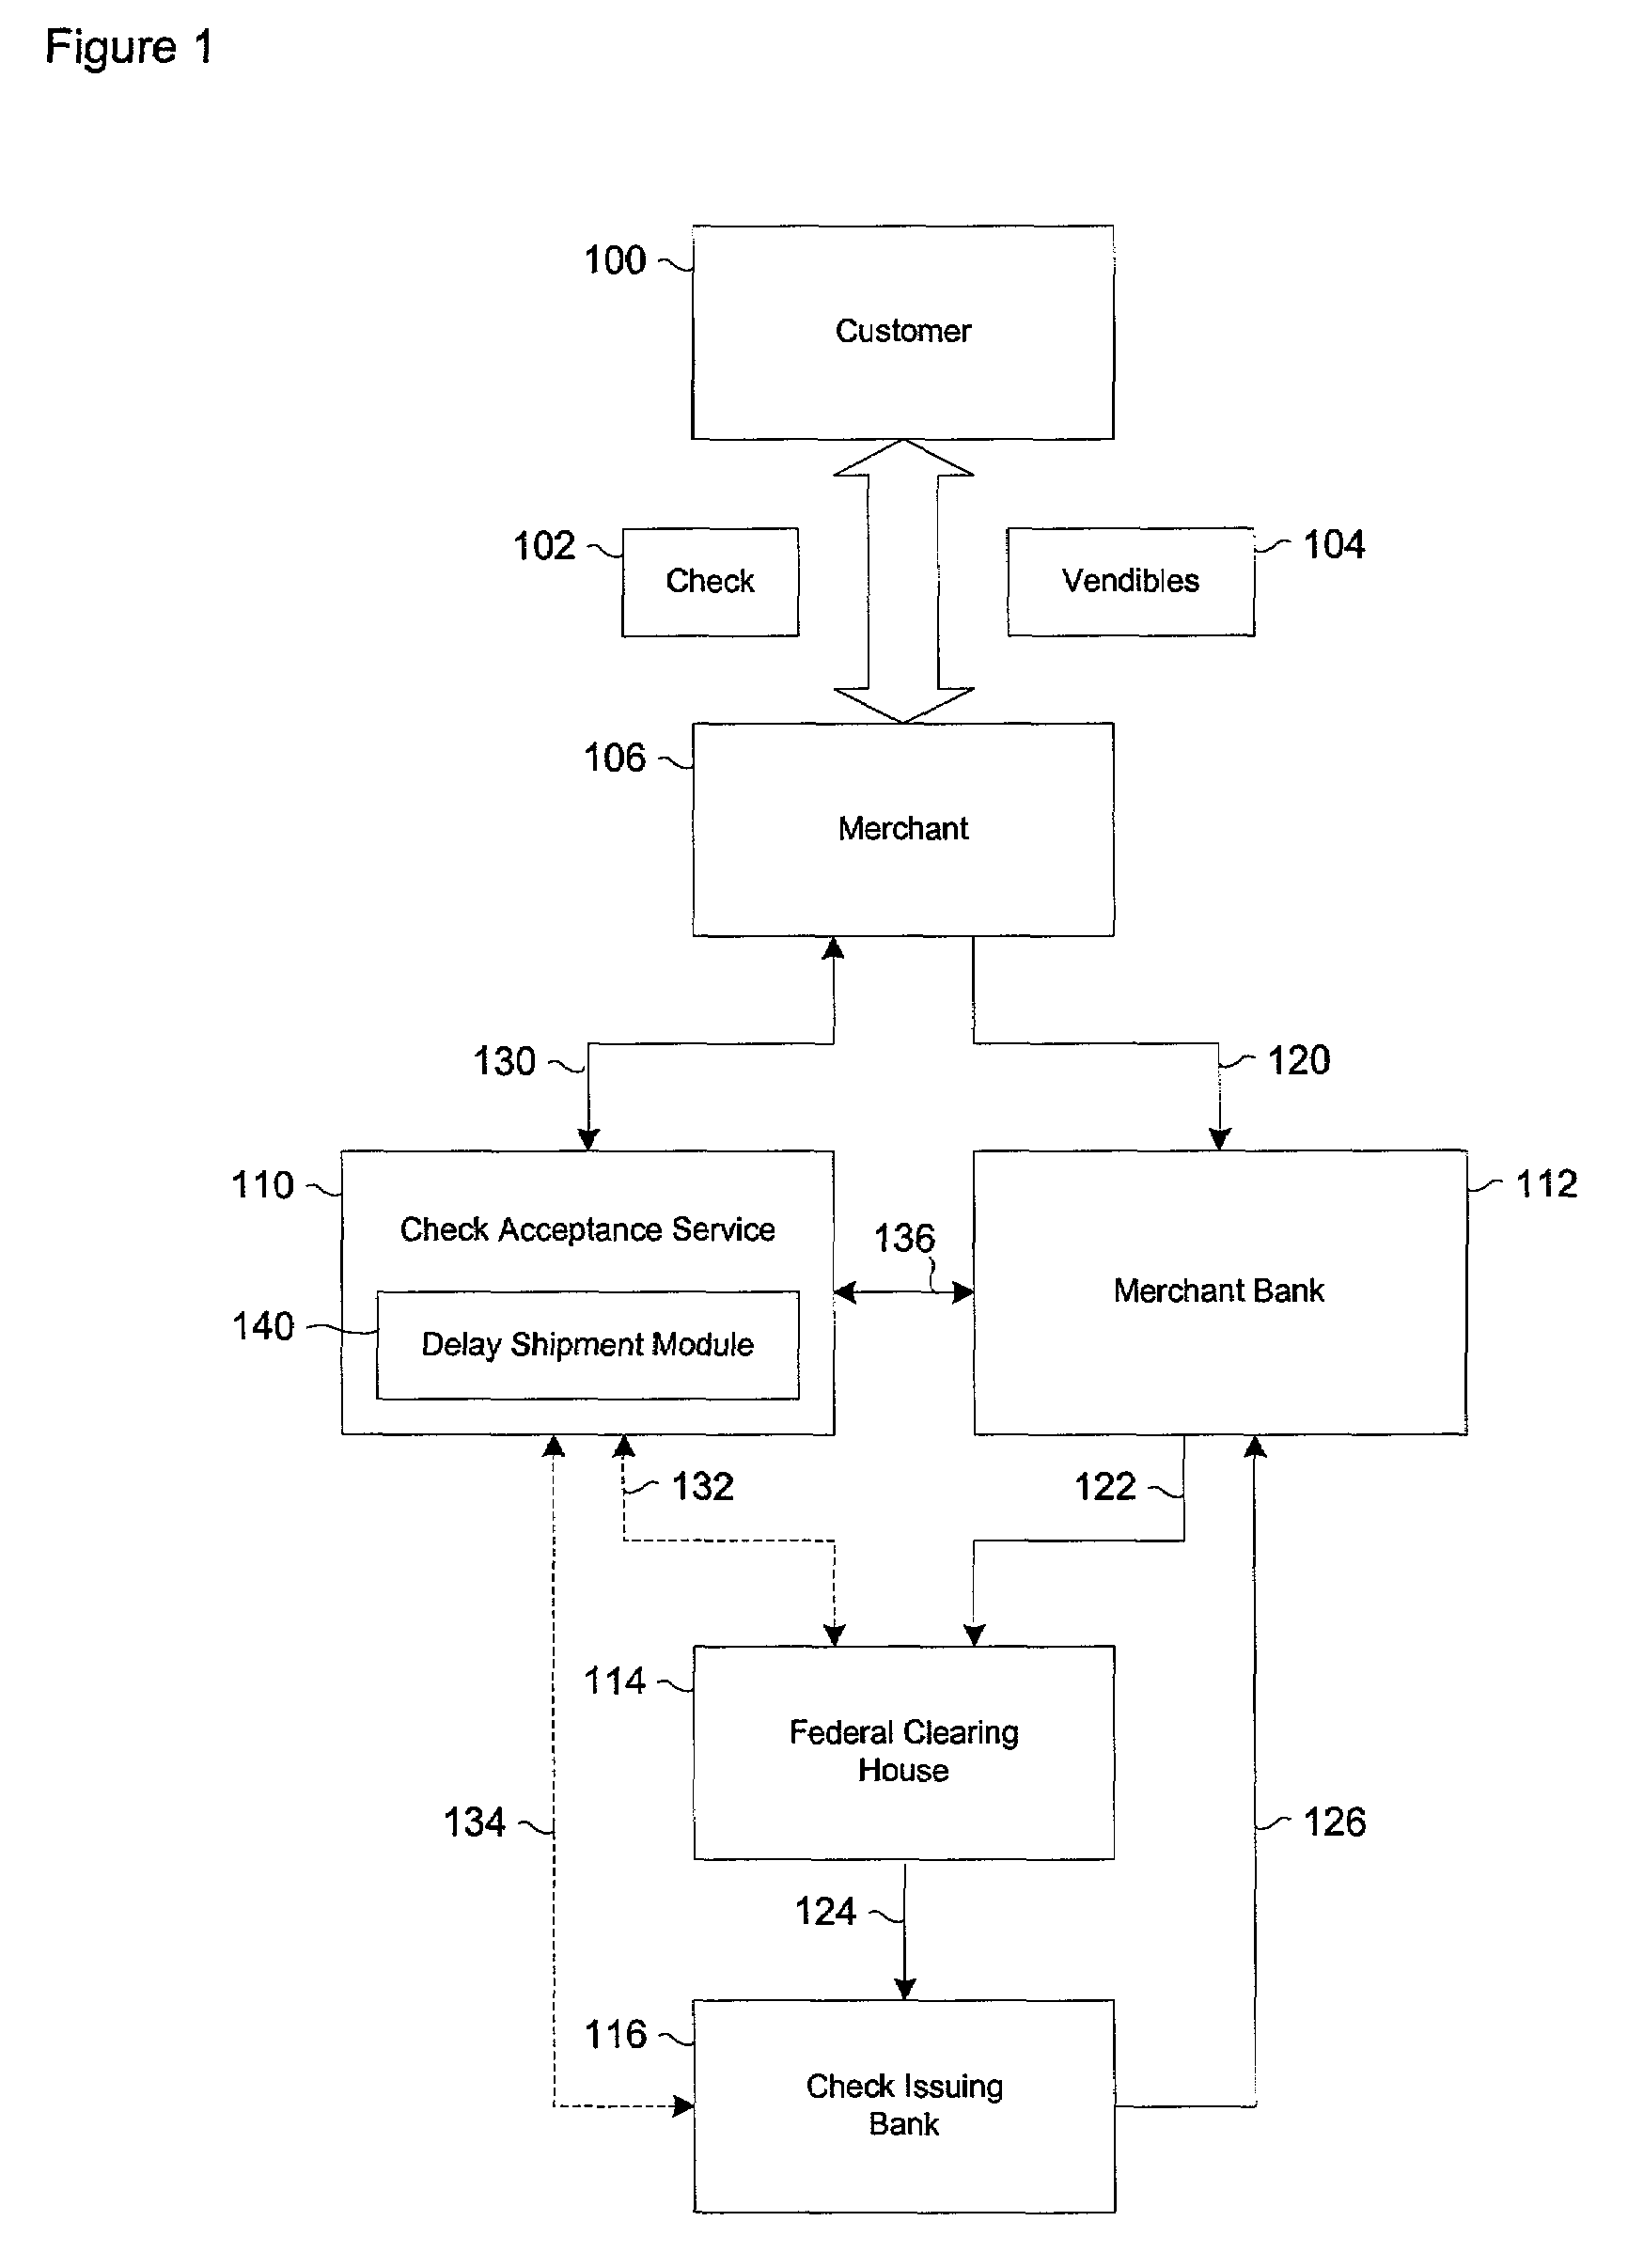 Systems and methods for selectively delaying financial transactions